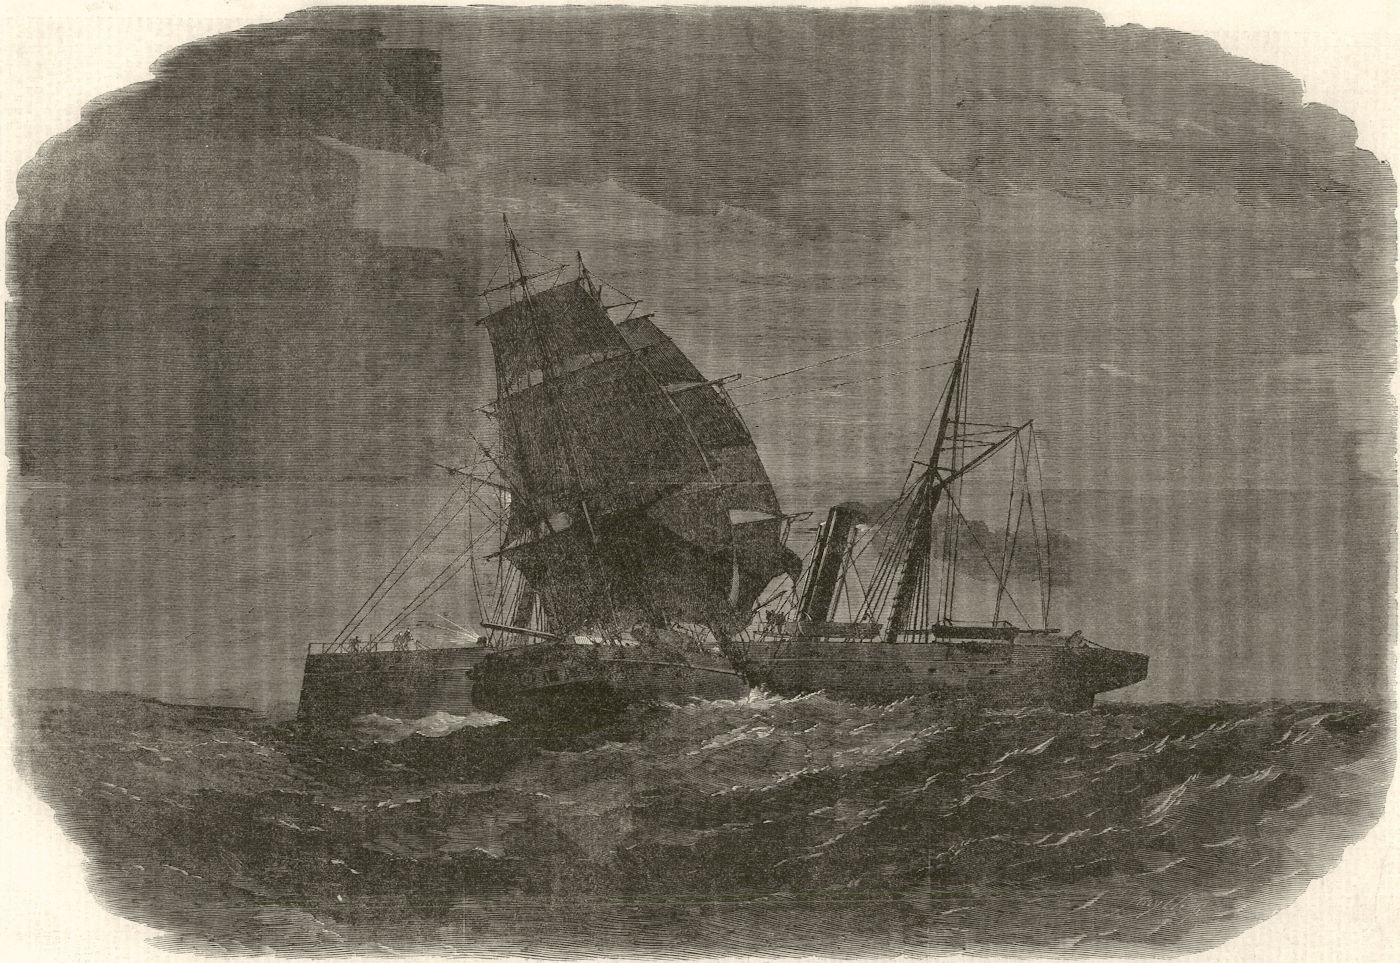 Collision between SS Liverpool & Barque La Plata off Point Lynas, Anglesey 1863